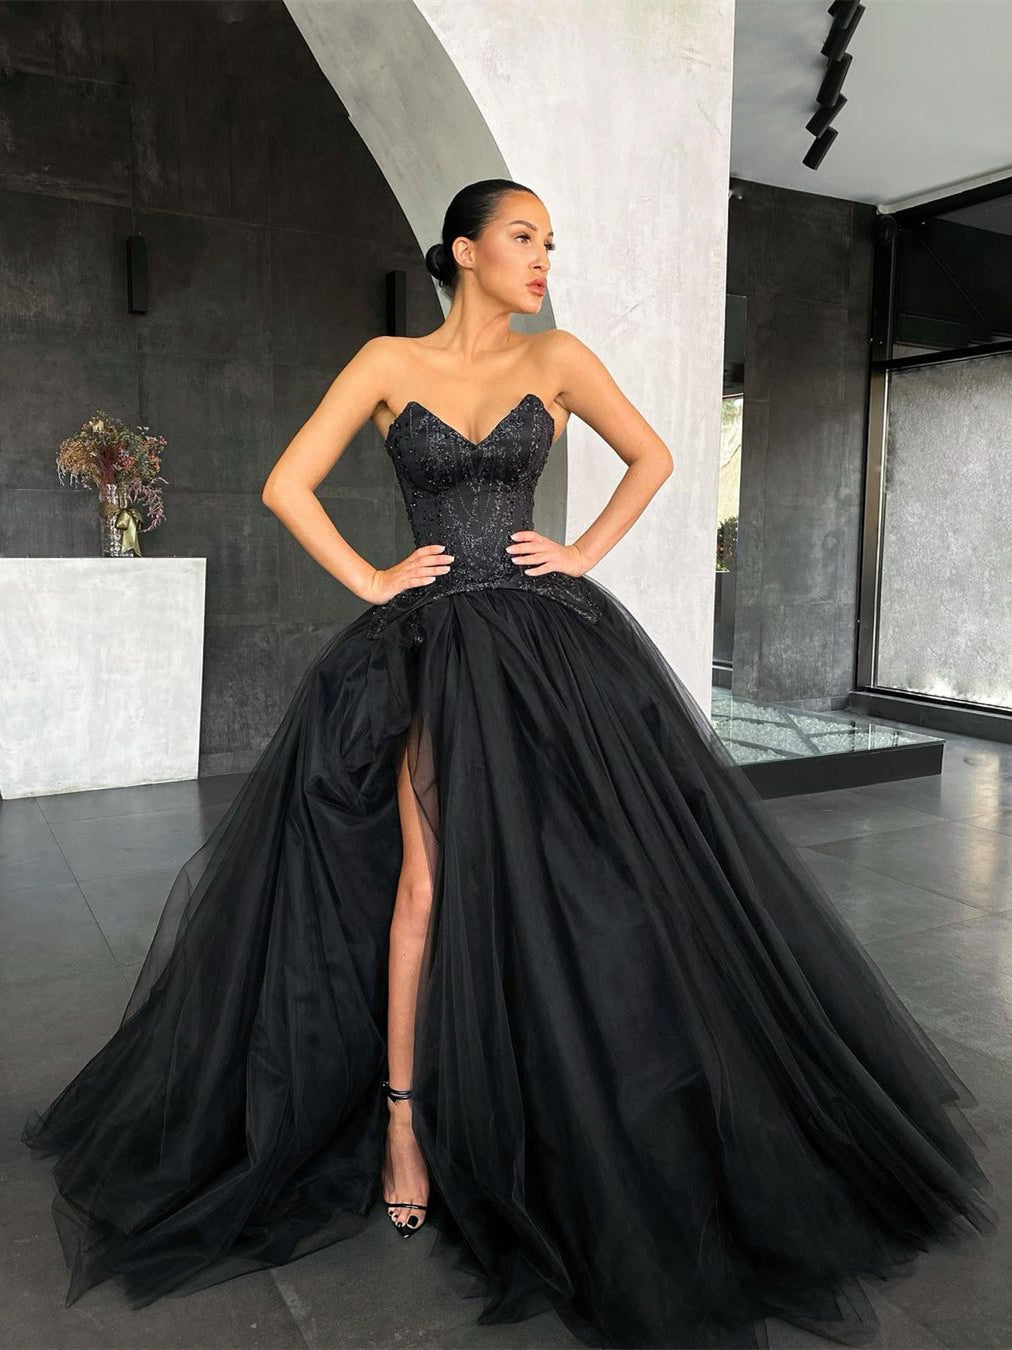 V-neck Long Ball Gown Black Prom Dresses, Lace Tulle Prom Dresses, Newest Prom Dresses